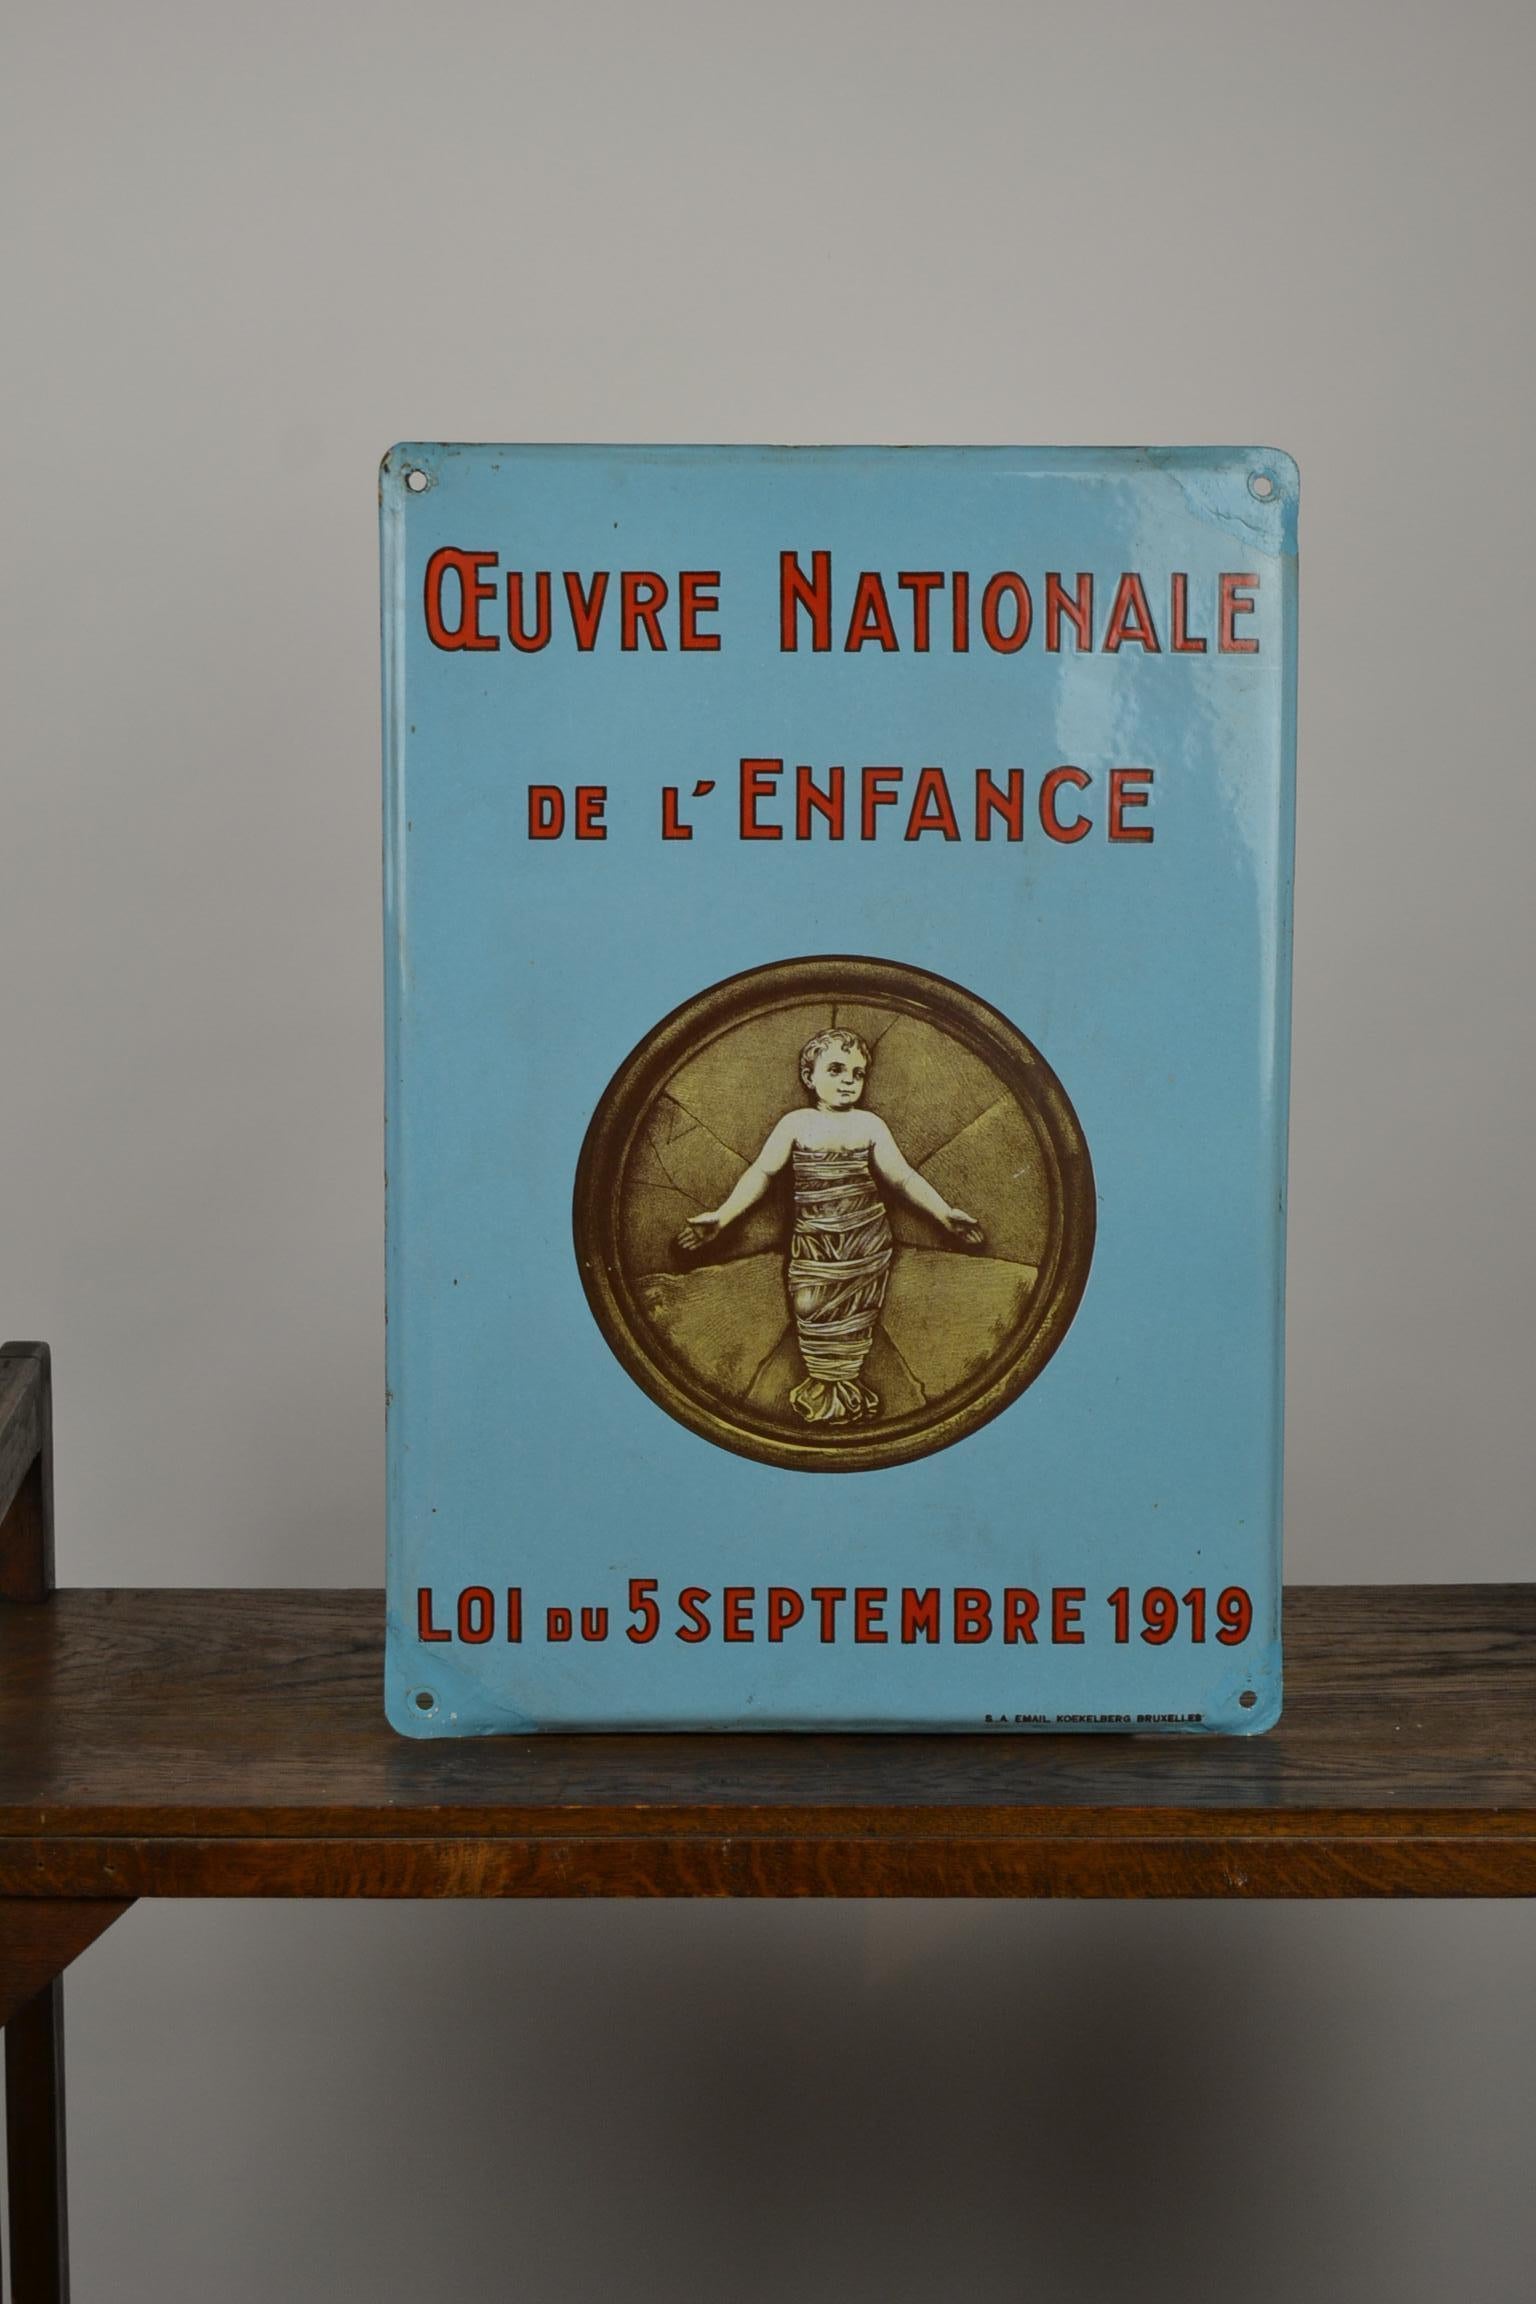 Rare enamel publicity sign - Door sign - Wall sign - Porcelain sign
for the National Child Welfare Work - Law of 5 September 1919 -
made in Memory of the Orphans after WW1. 

Light blue colored sign with an Image of a little Child - Baby.